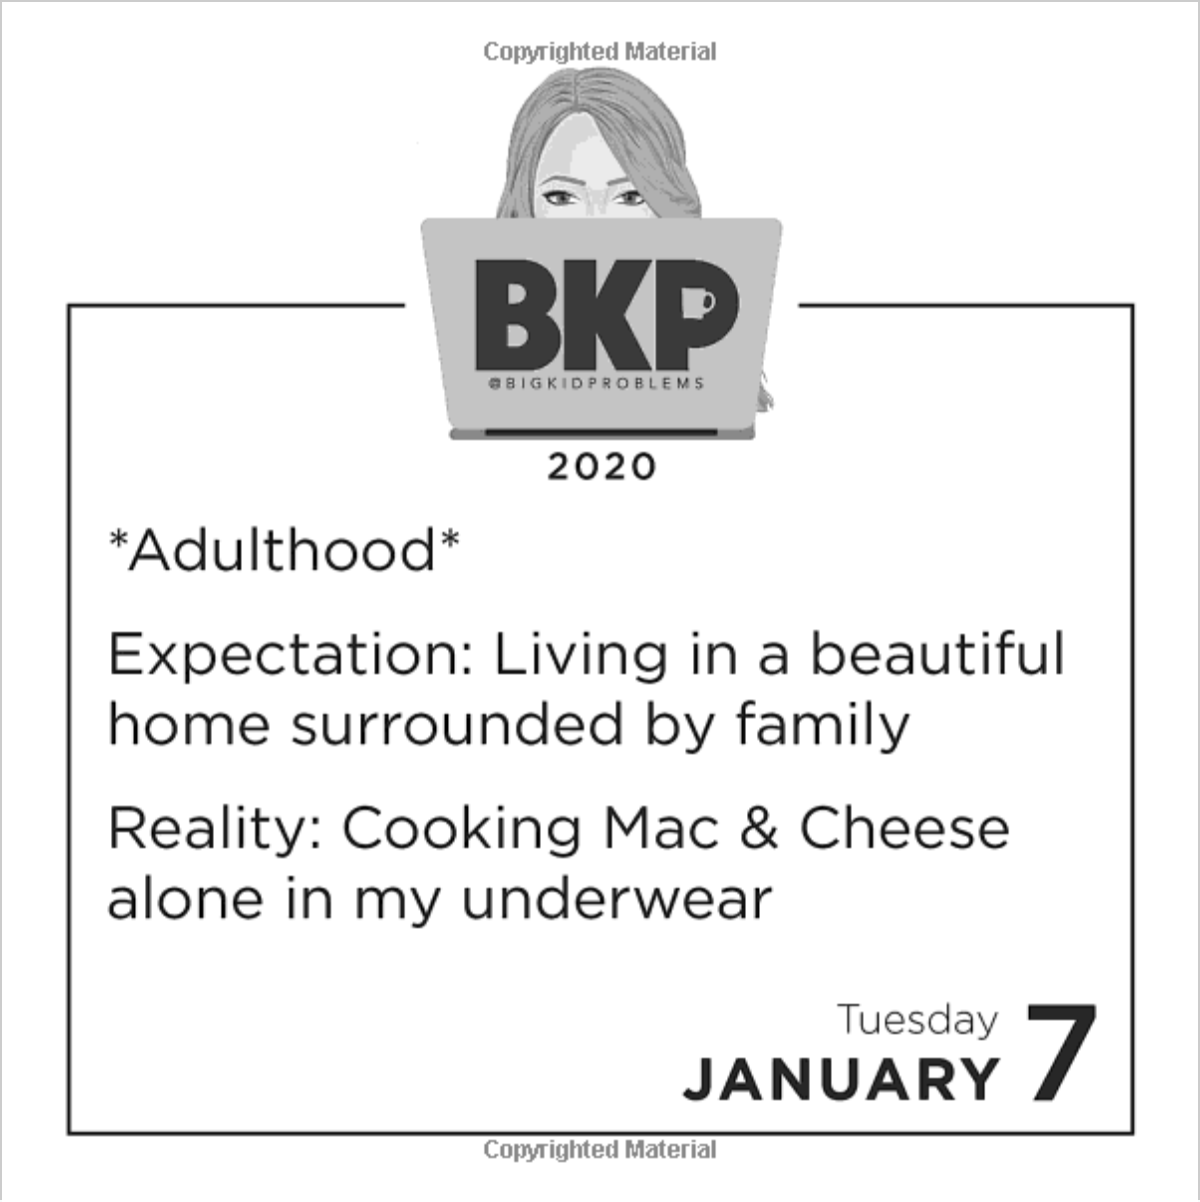 BigKidProblems 2020 Day-to-Day Calendar